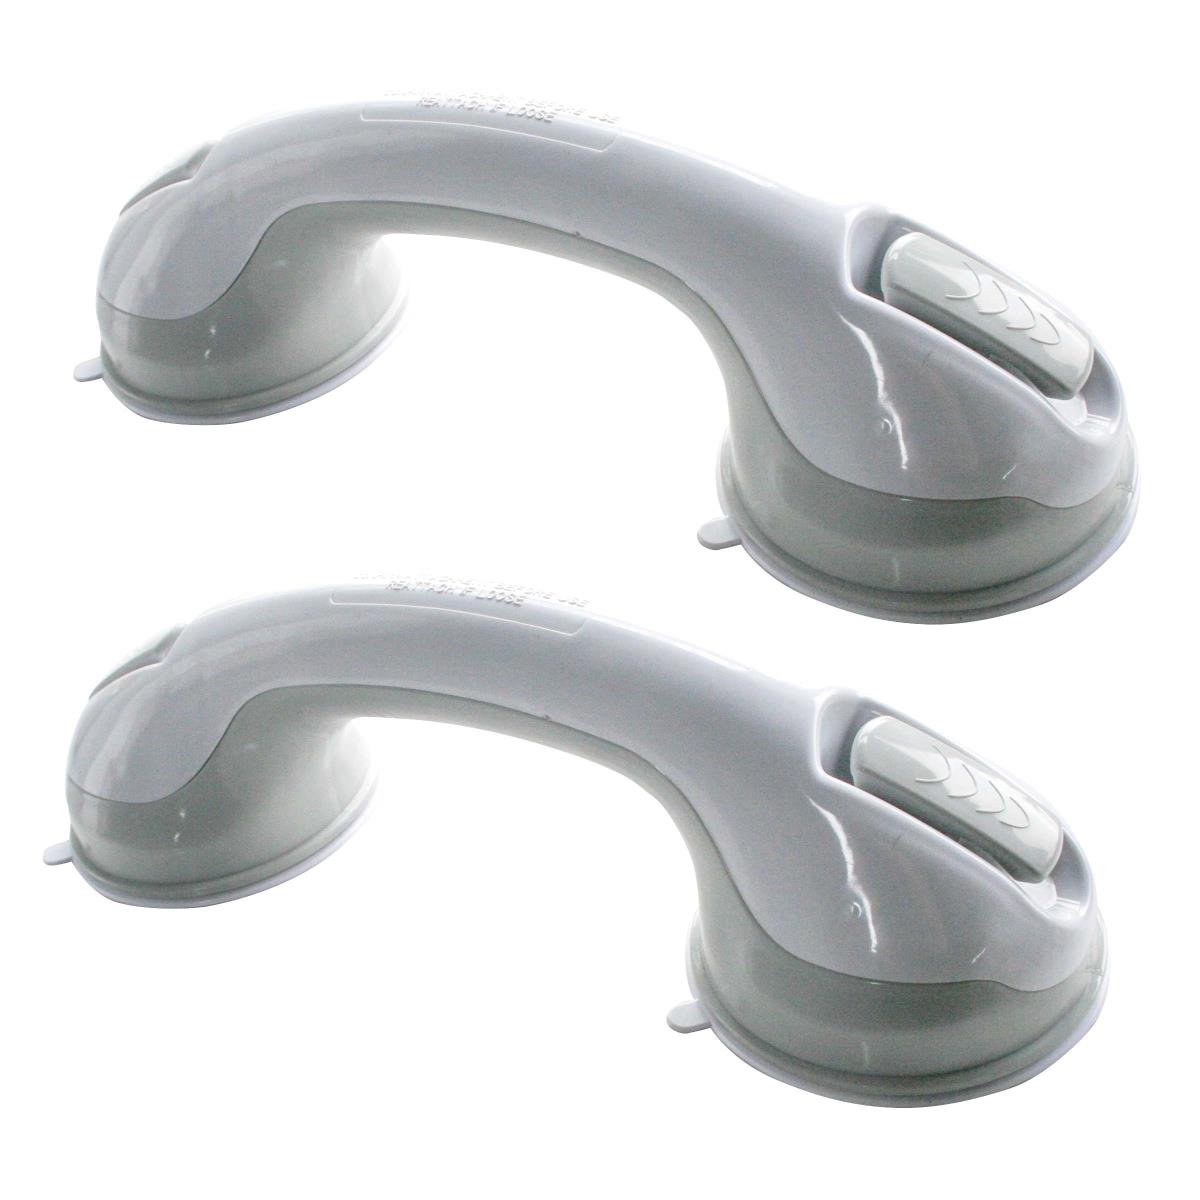 Picture of AmeriHome SGBSET12 12 in. Repositionable Suction Grab Bar, Black - 2 Piece